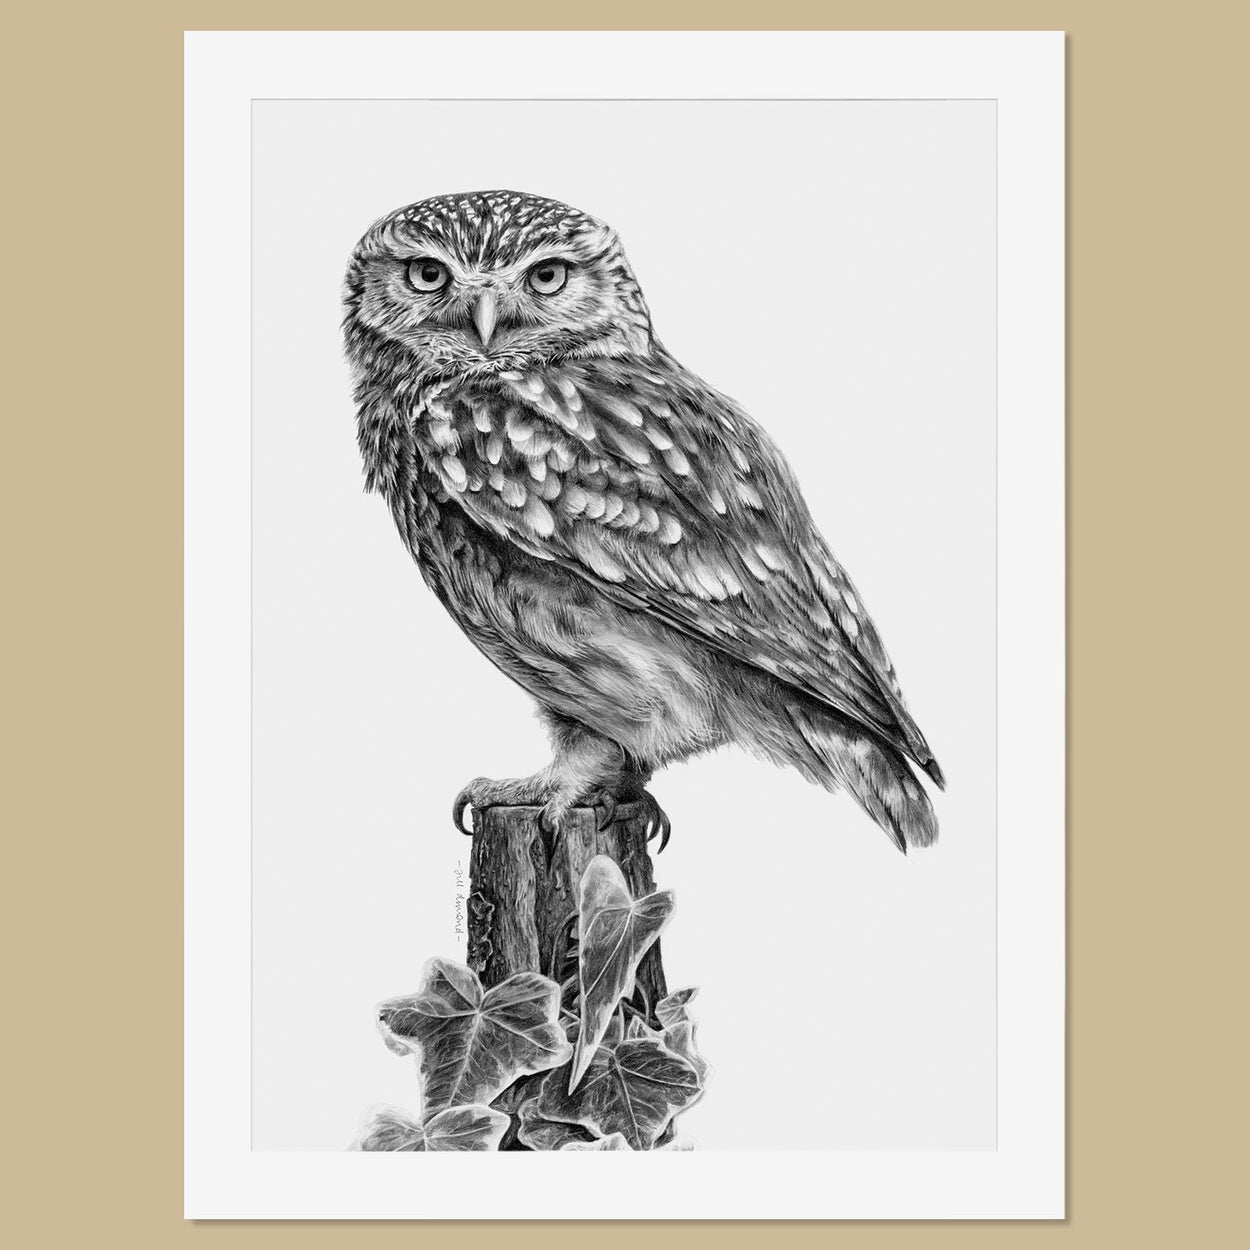 Original Little Owl Pencil Drawing - The Thriving Wild